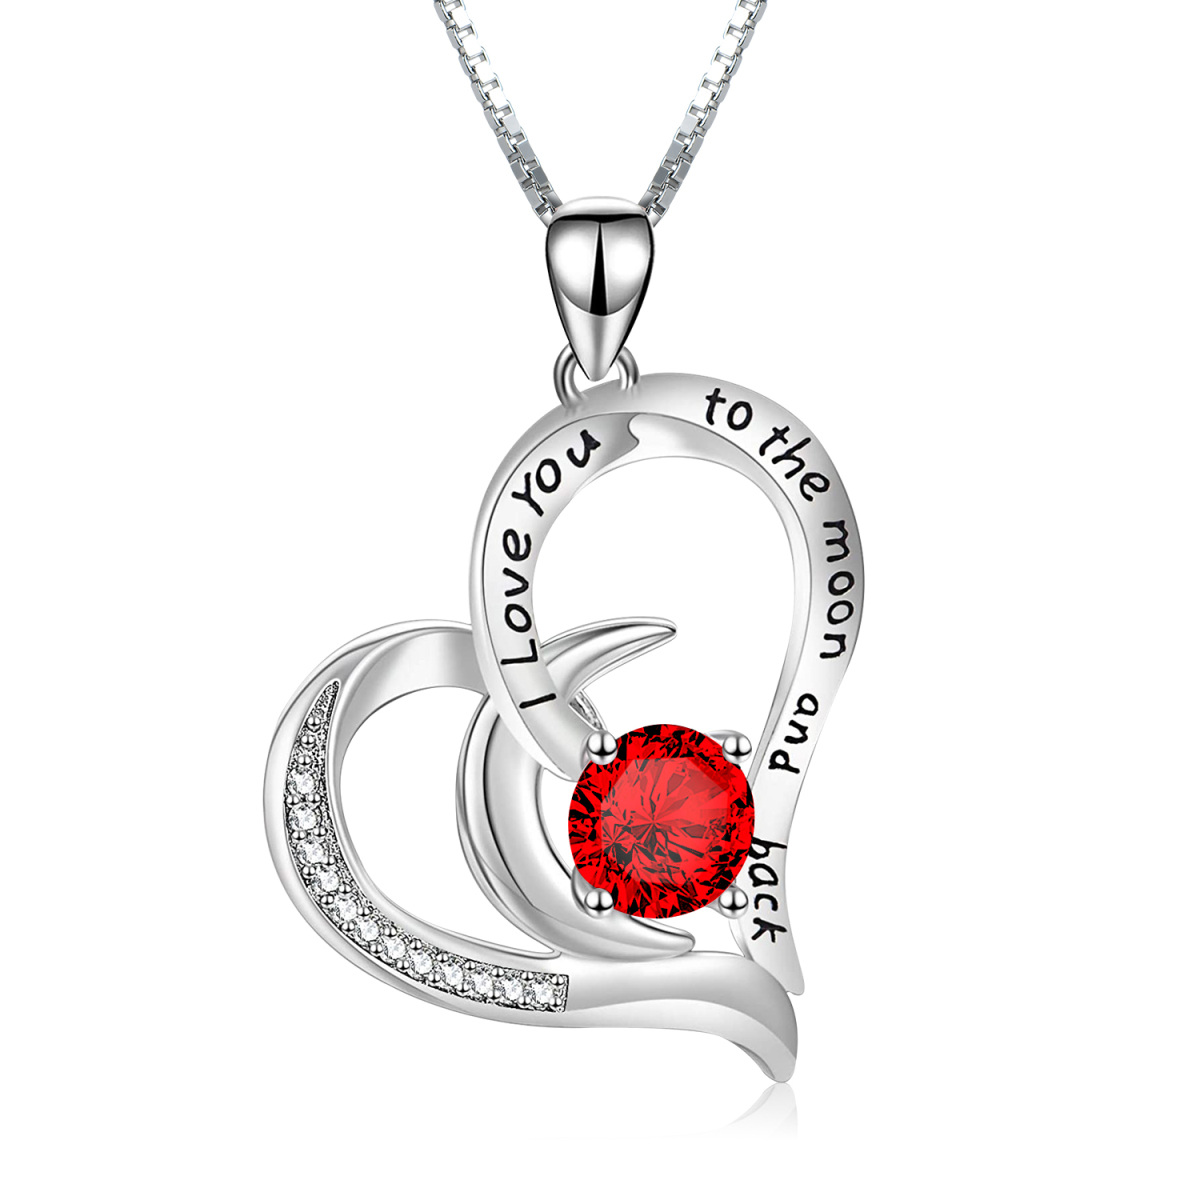 Sterling Silver Circular Shaped Cubic Zirconia Heart & Moon Pendant Necklace with Engraved Word-1